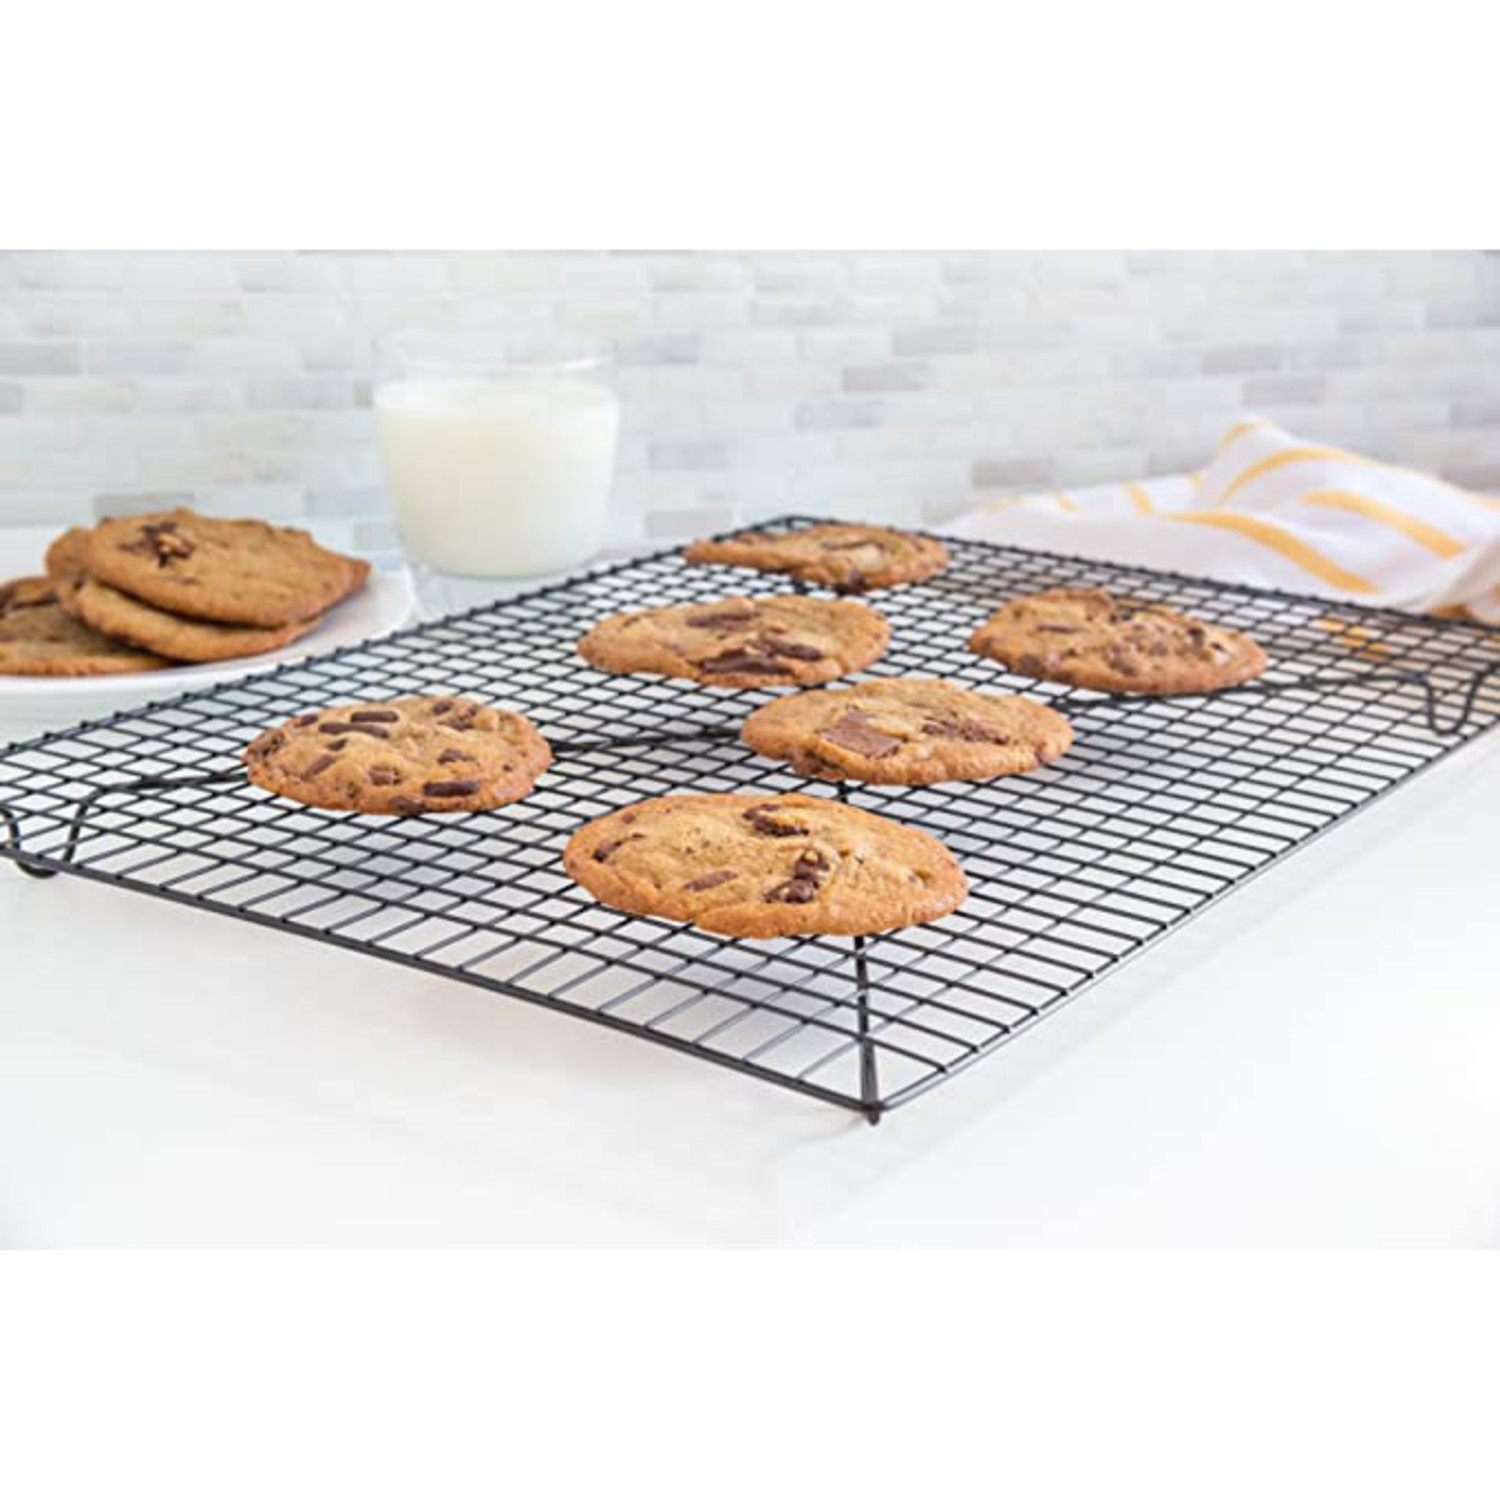 Making Sponge Cake Cakes Cooling On A Retro Cooling Rack Stock Photo -  Download Image Now - iStock